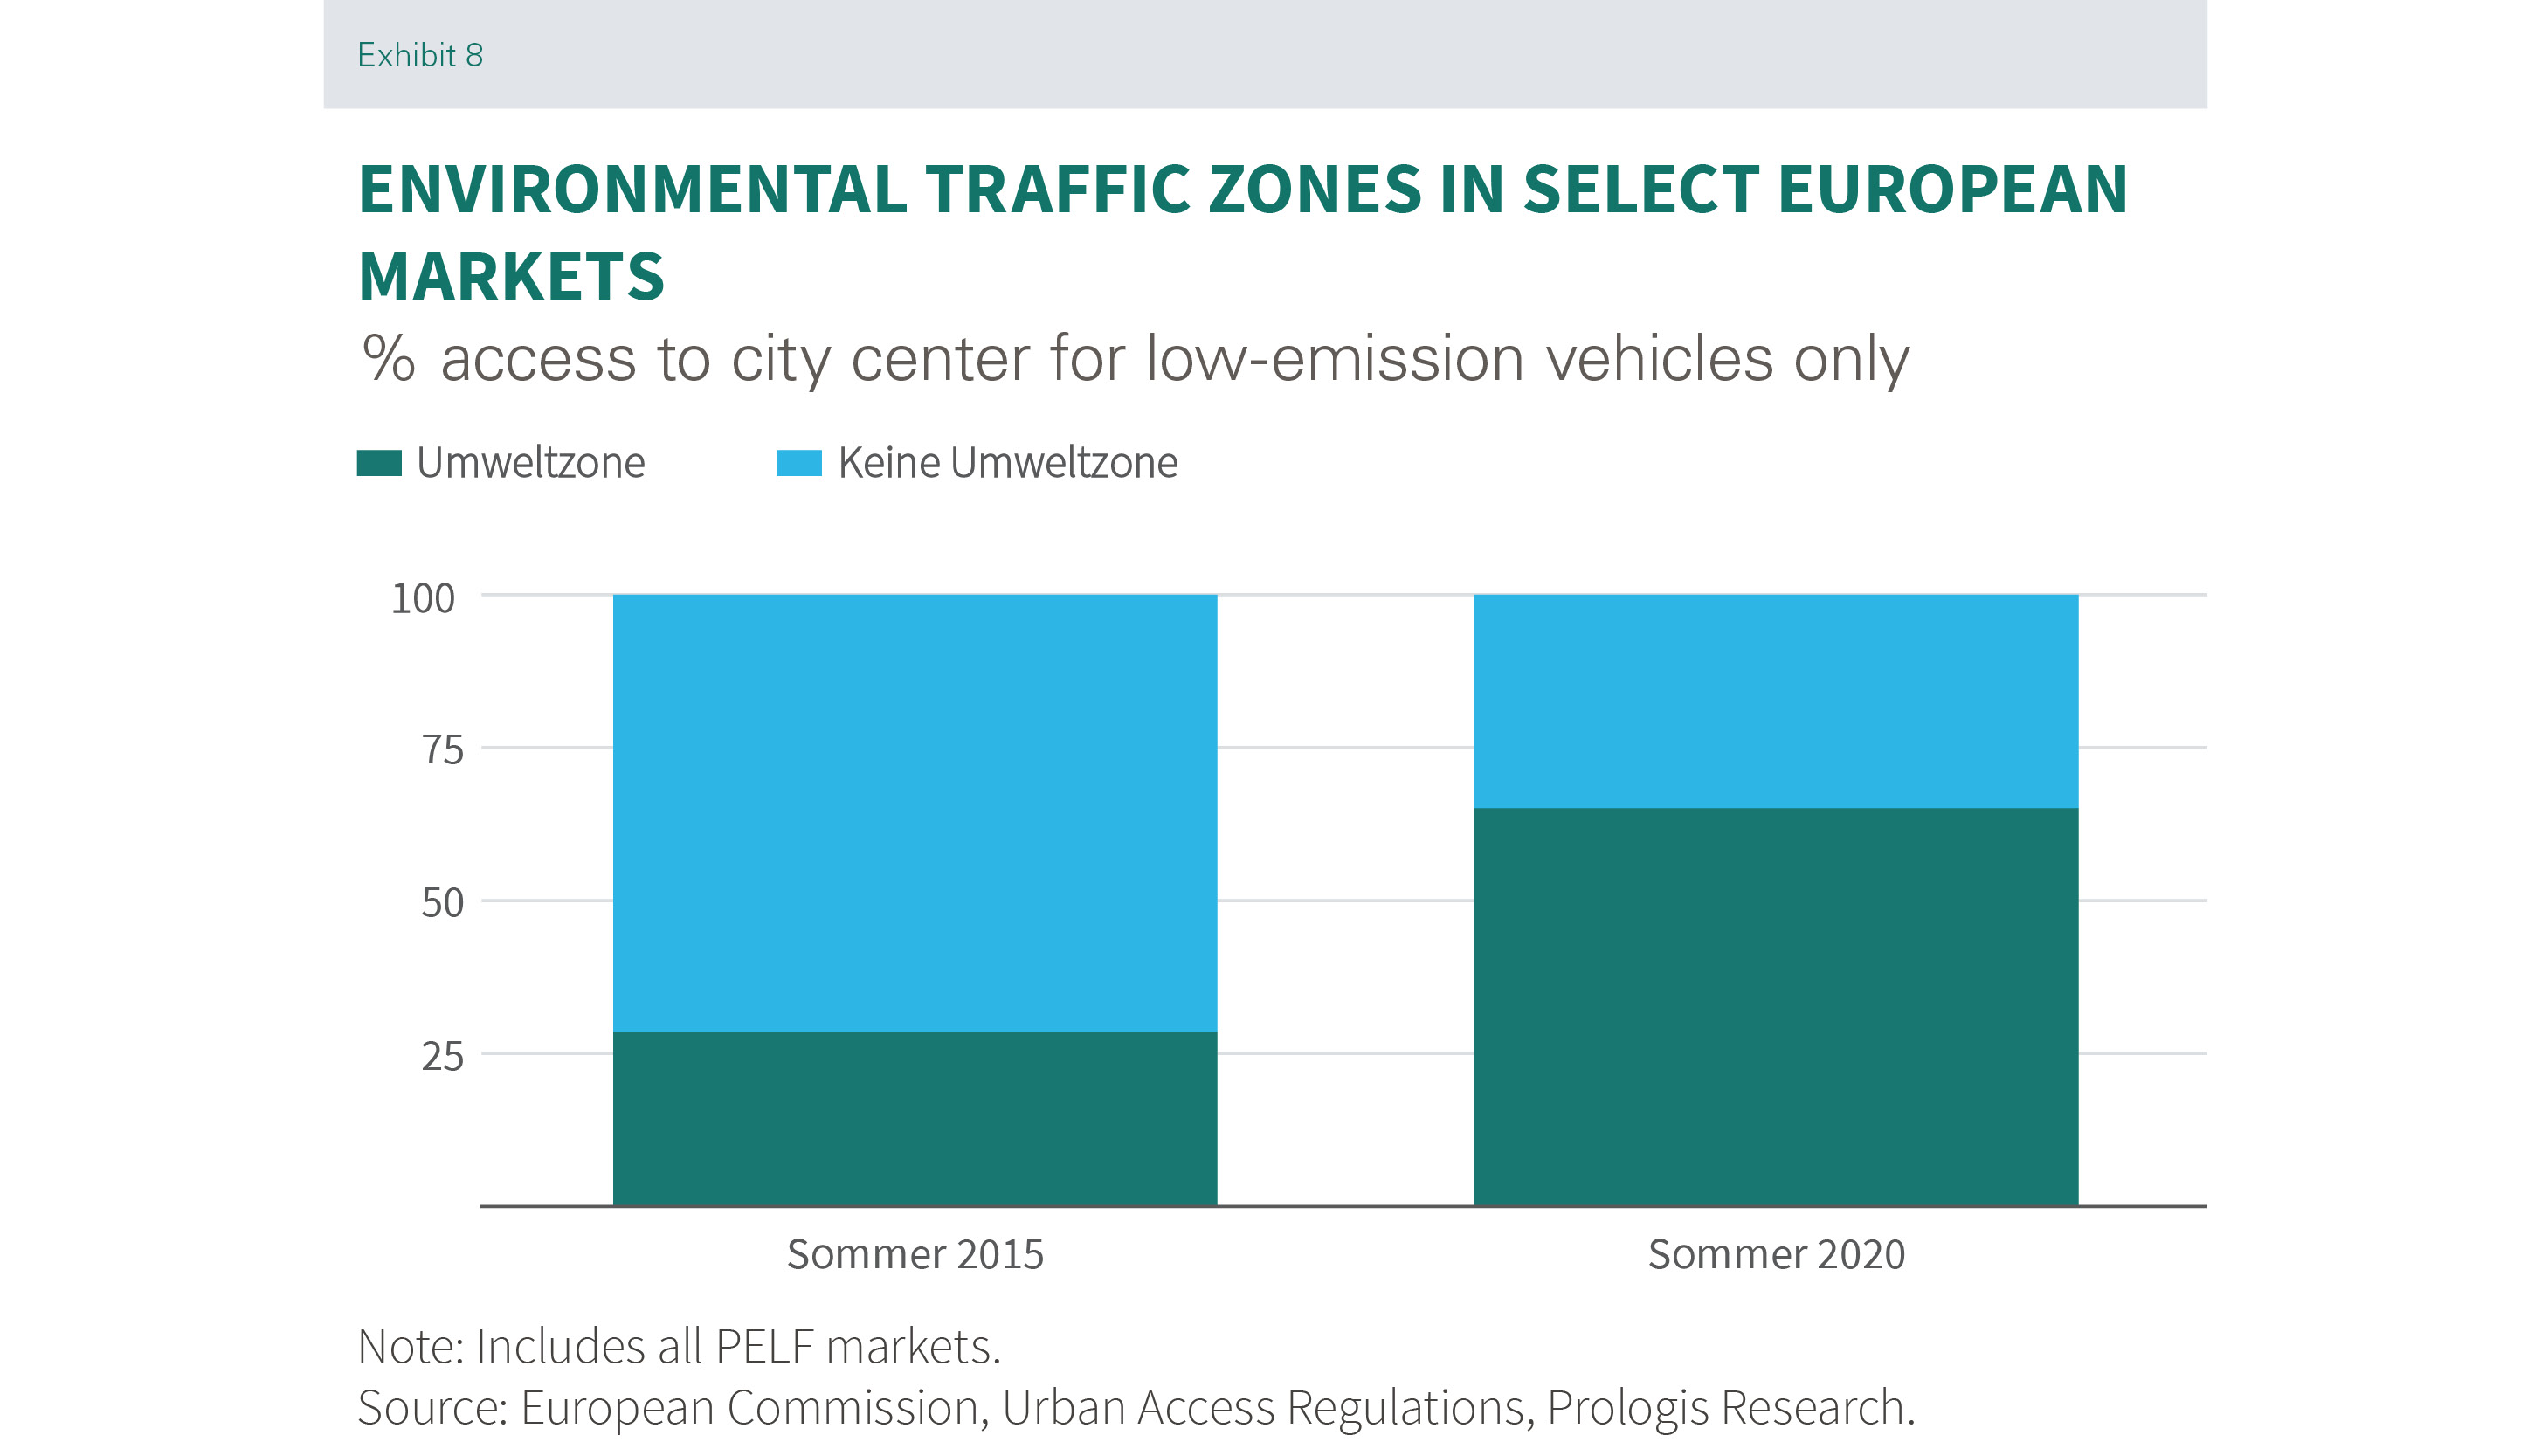 Prologis Research_Paper_Environmental traffic zones_selected european markets